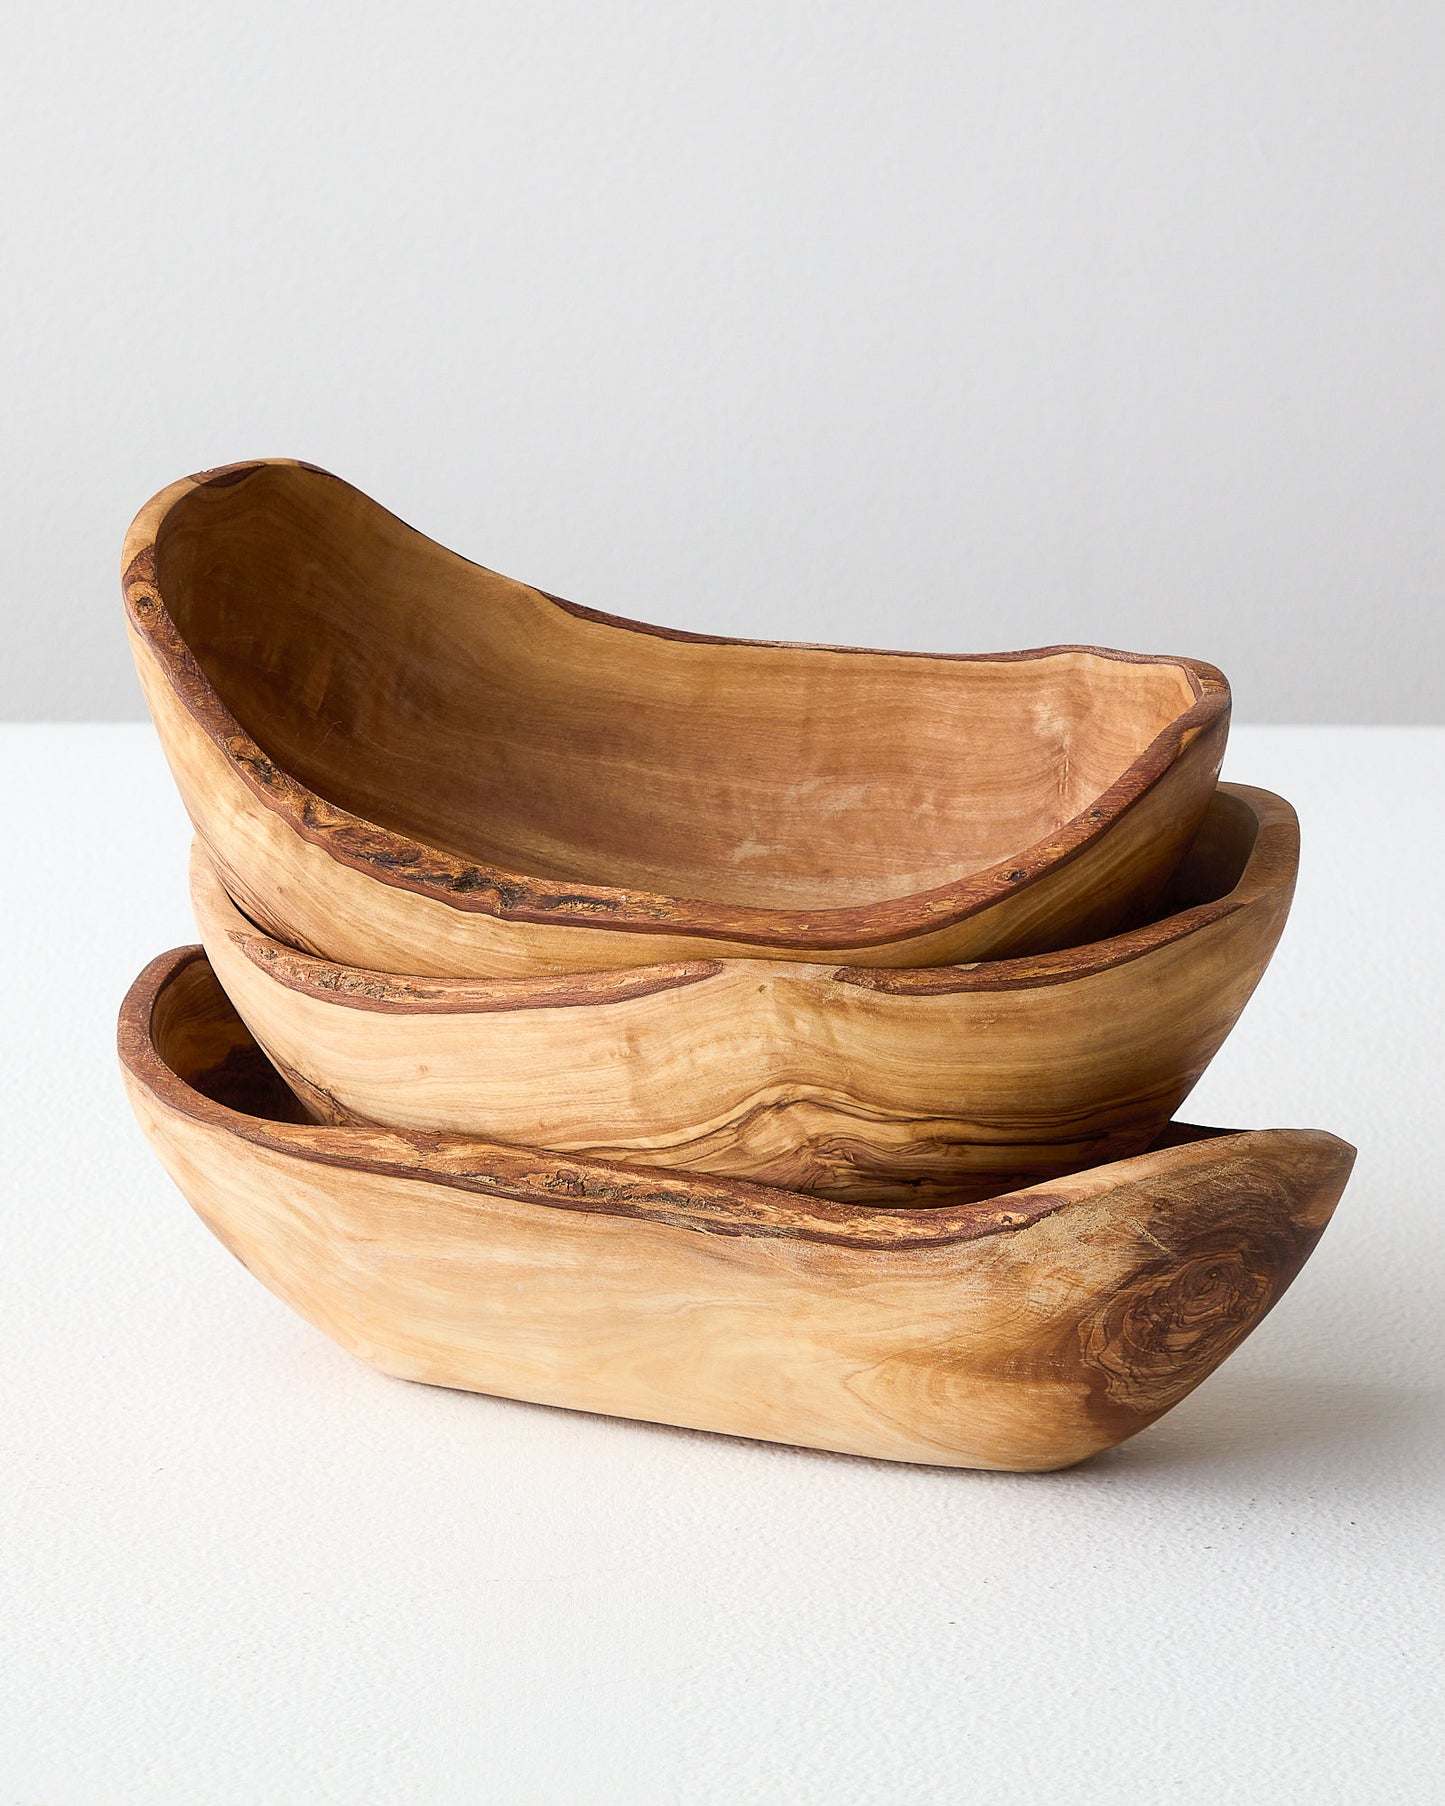 The Medina Oval Serving Bowl by Fairkind.